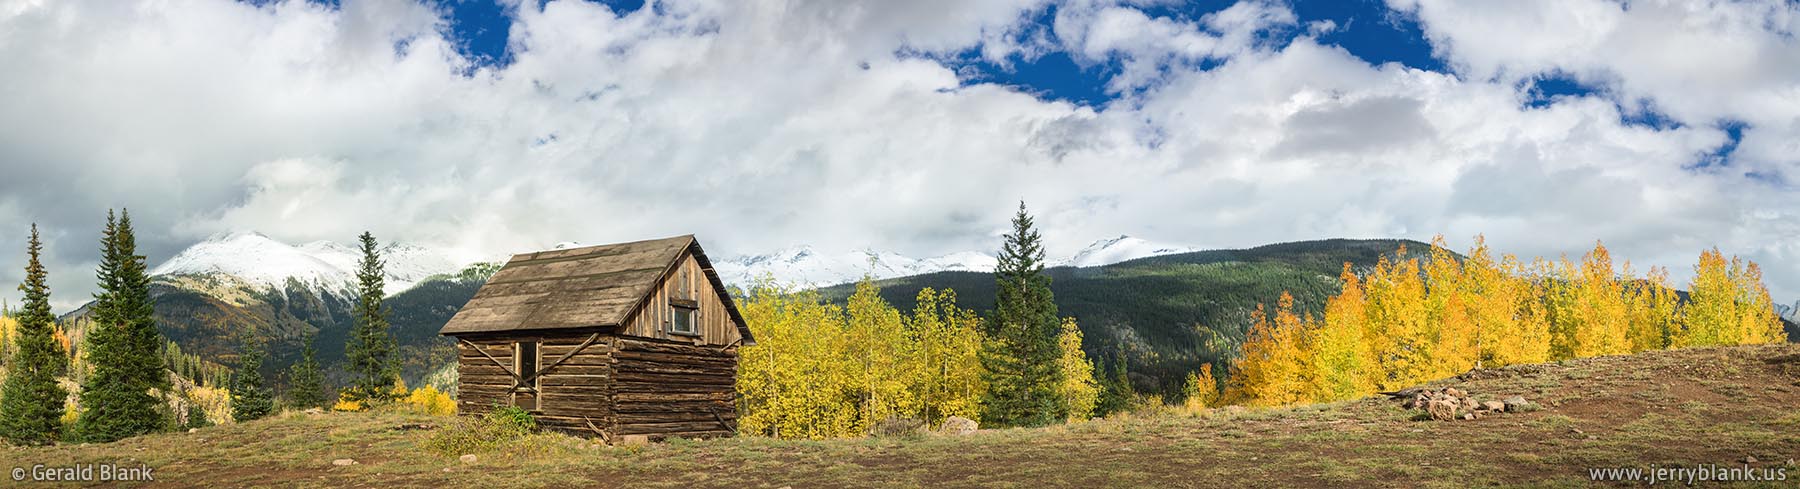 #52109 - Log cabin and autumn foliage alongside a trail in the San Juan National Forest in Colorado - photo by Jerry Blank